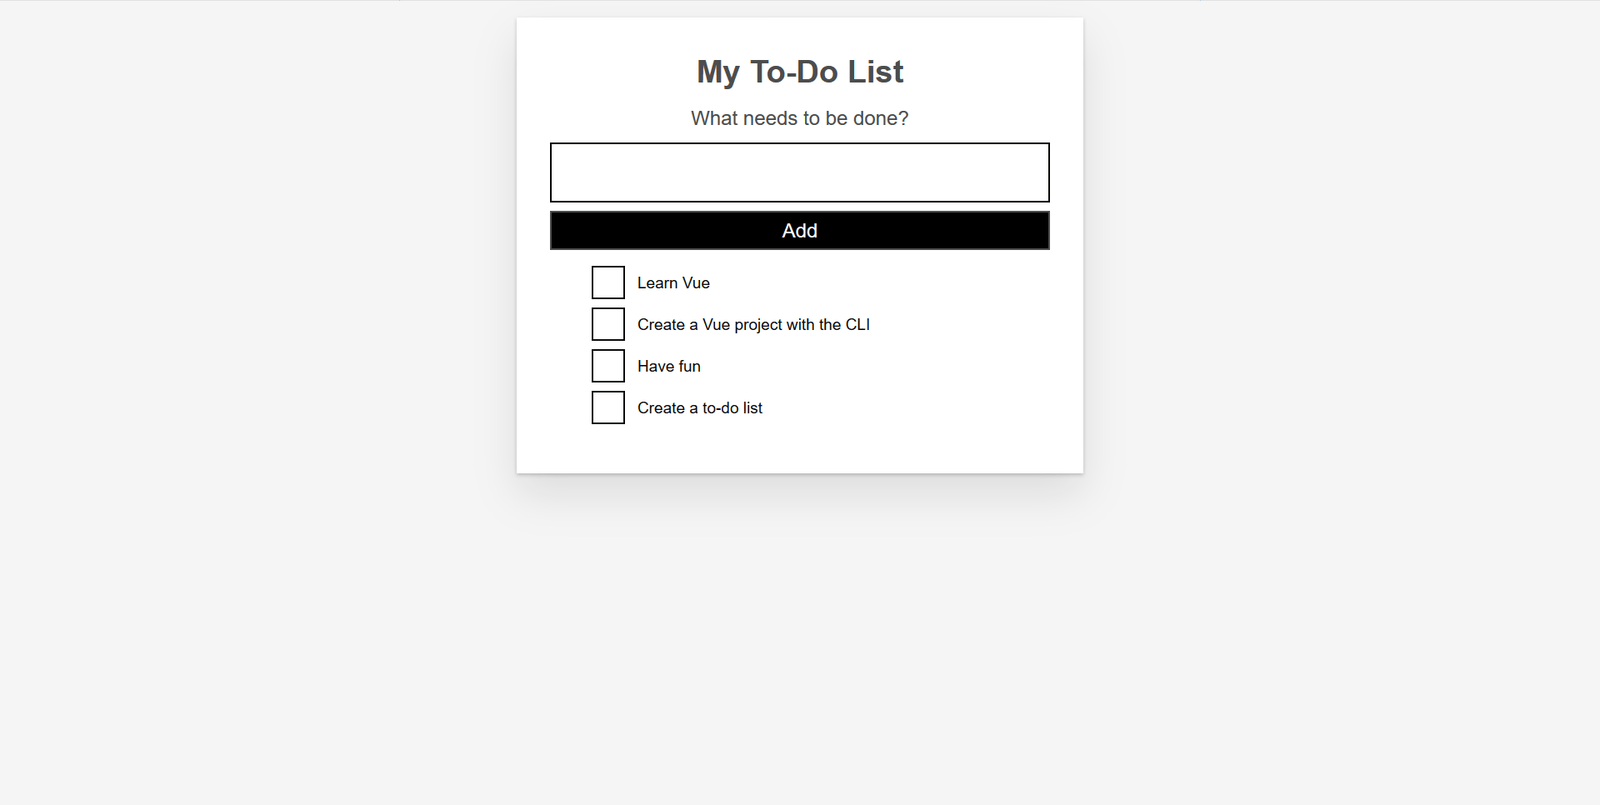 the todo app with complete styling. The input form is now styled properly, and the todo items now have spacing and custom checkboxes